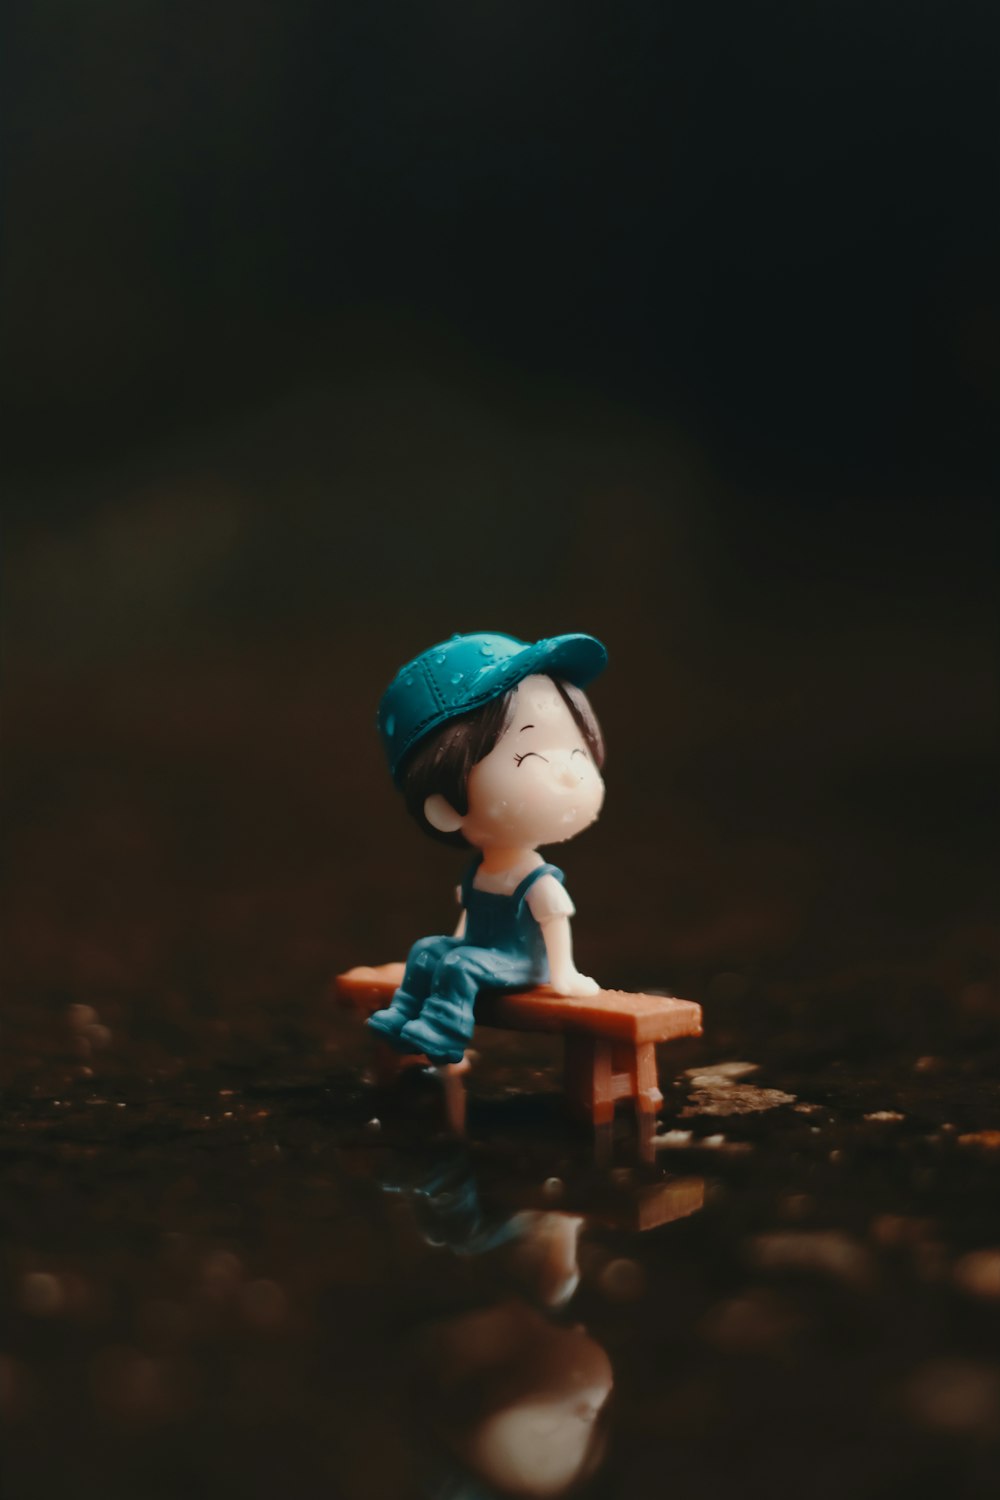 a small figurine of a person sitting on a bench